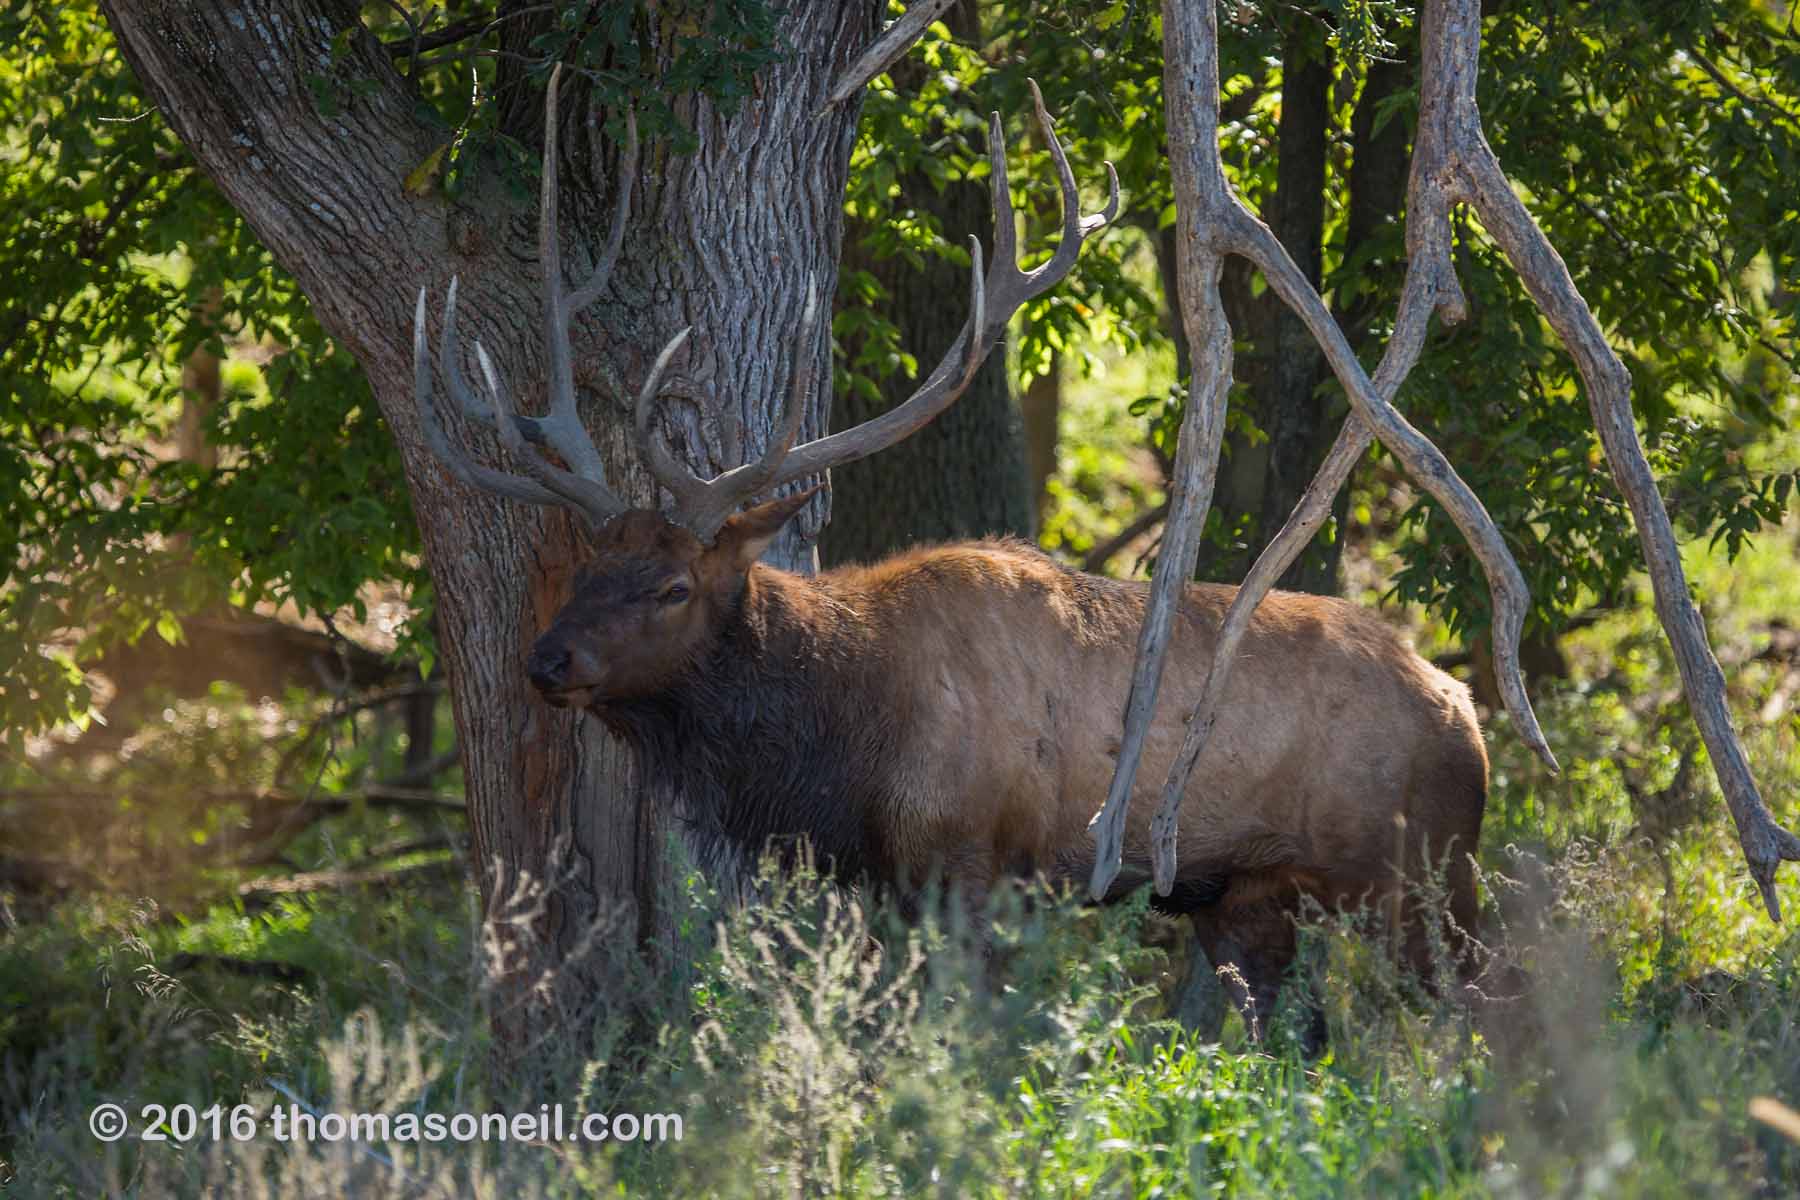 Elk, Lee G. Simmons Conservation Park and Wildlife Safari.  Click for next photo.